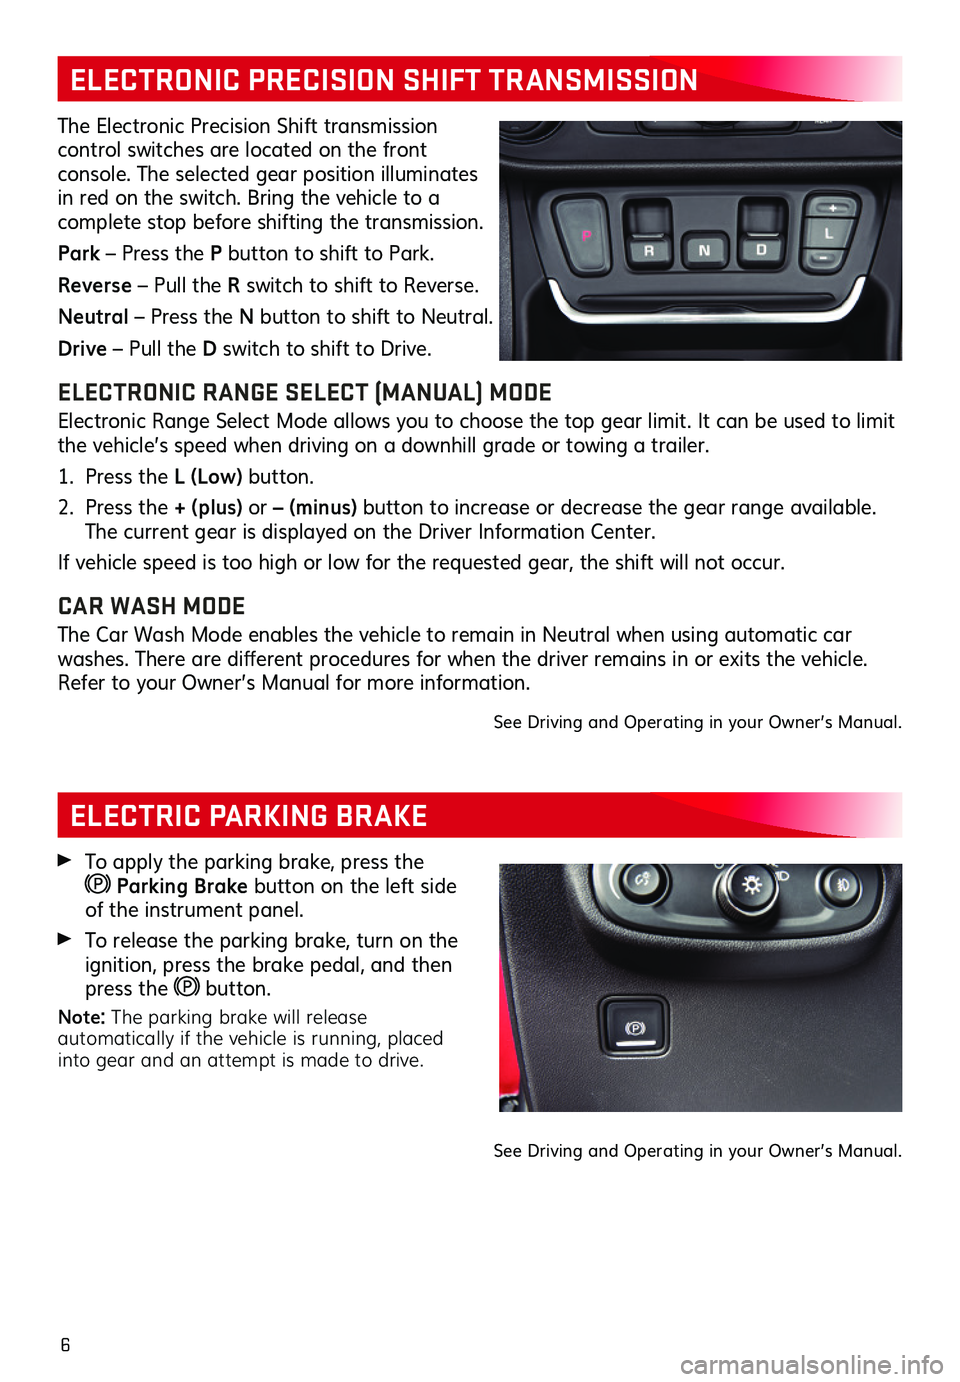 GMC TERRAIN 2021  Get To Know Guide 6
ELECTRIC PARKING BRAKE
ELECTRONIC PRECISION SHIFT TRANSMISSION 
The Electronic Precision Shift transmission  
control switches are located on the front  
console. The selected gear position illumina